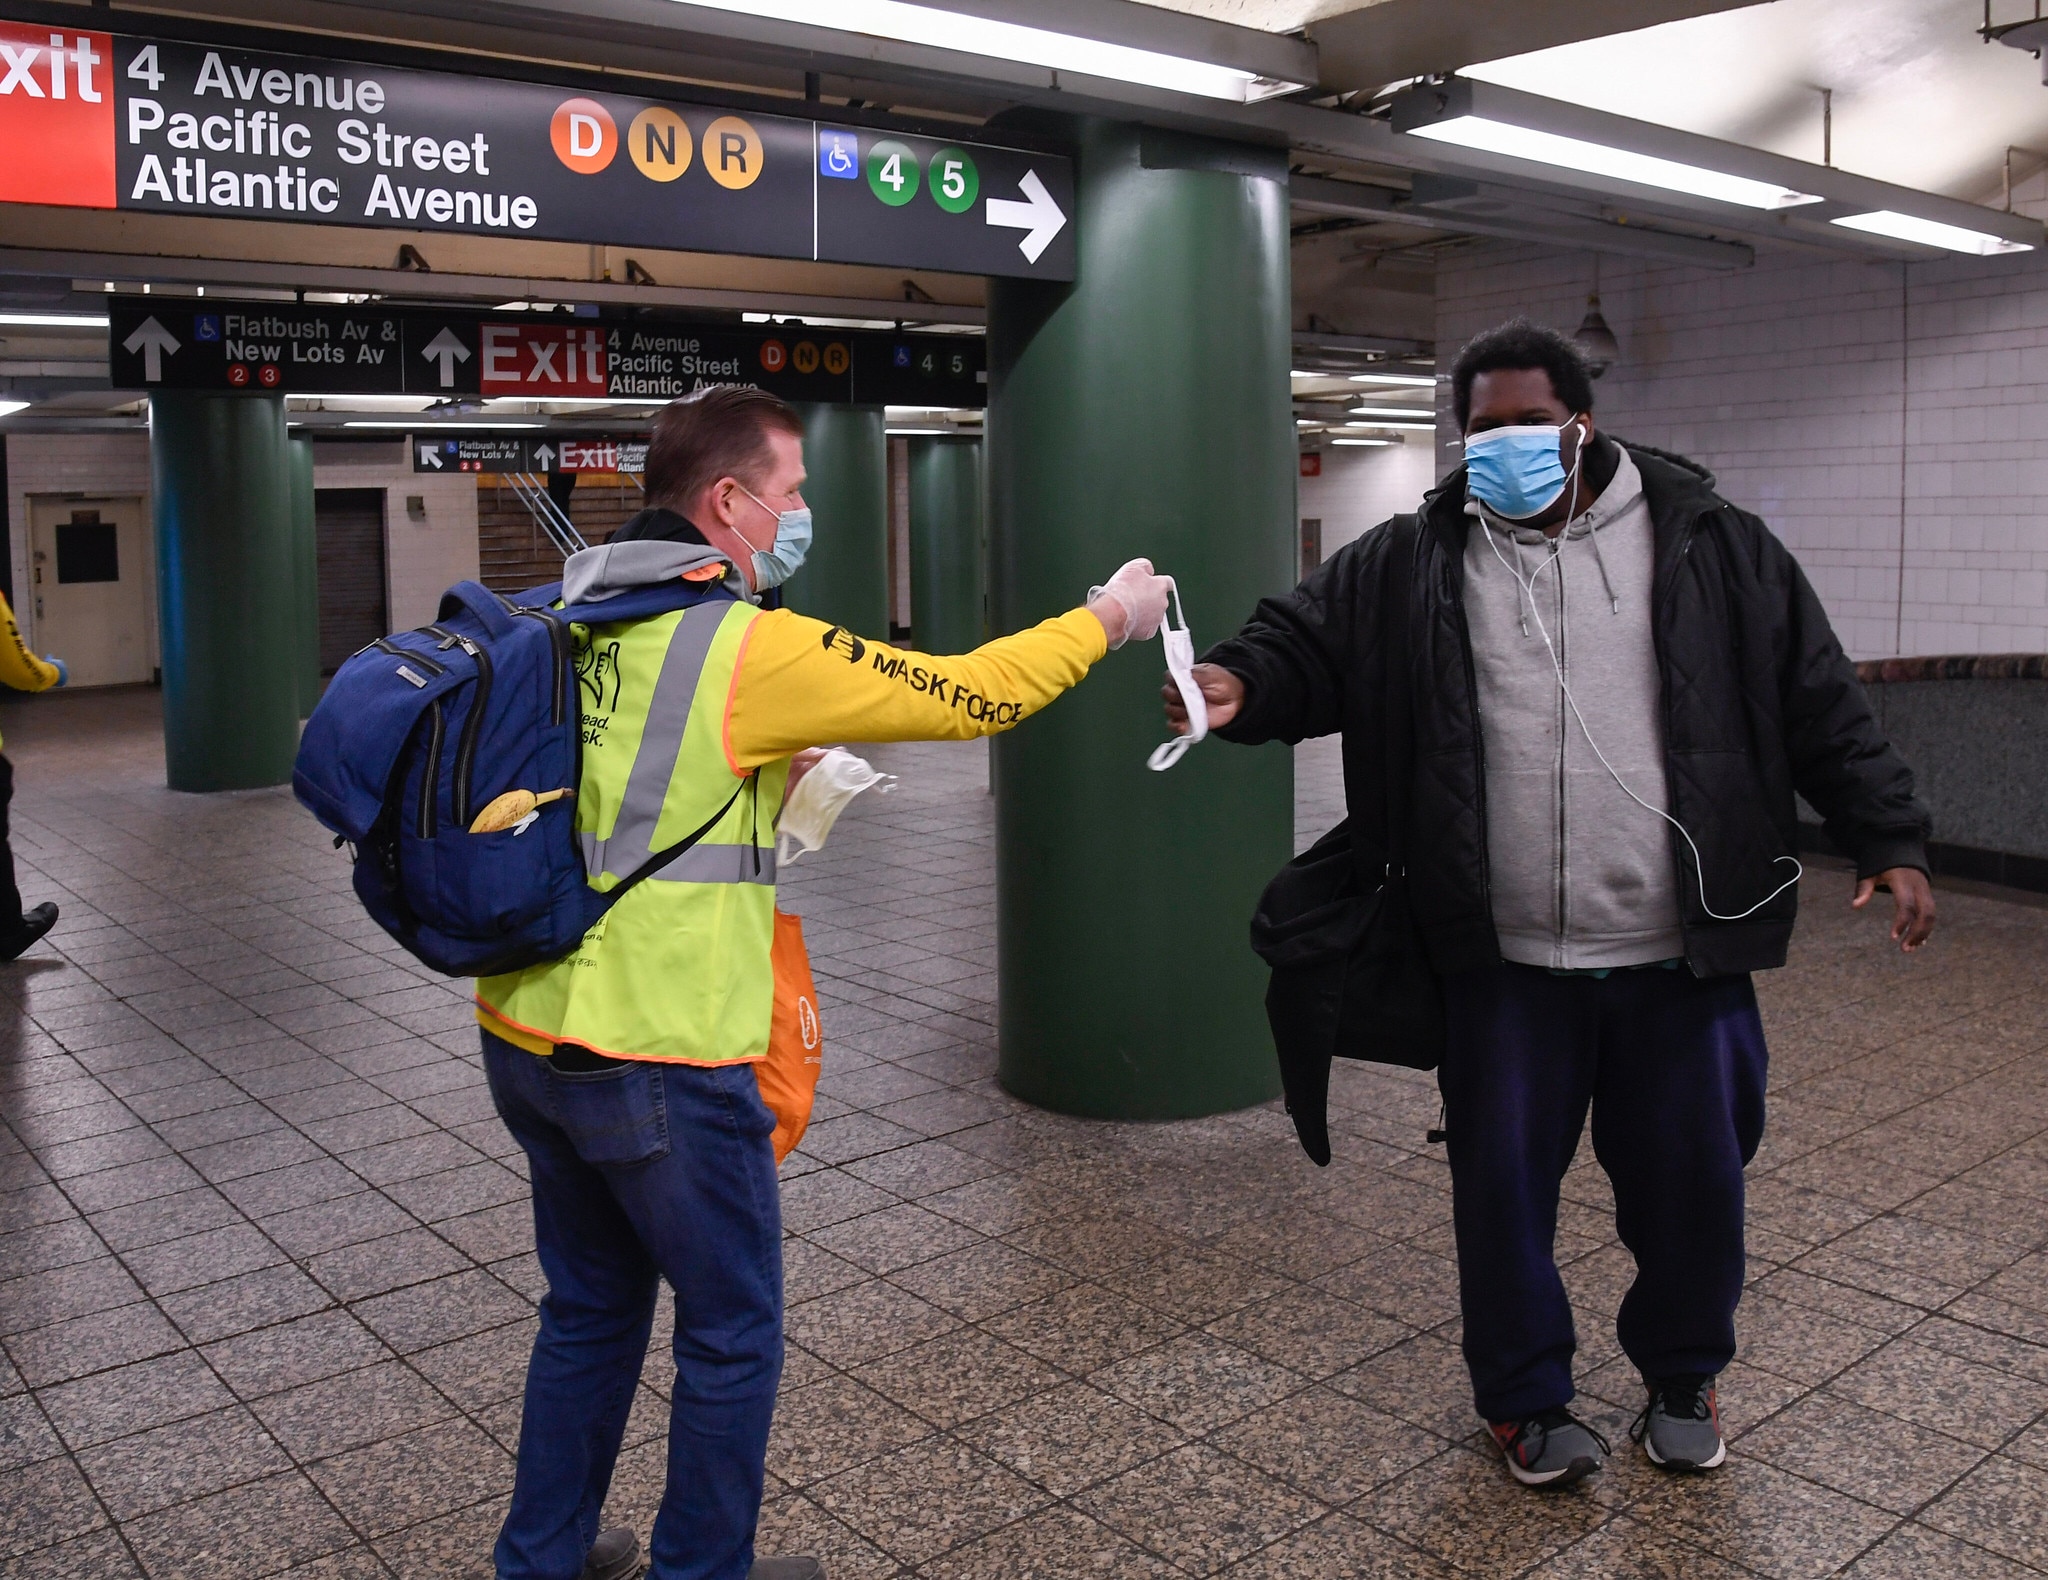 MTA Mask Force Hands Out More Masks Across City as TV News Personalities Make Announcements in the Subway